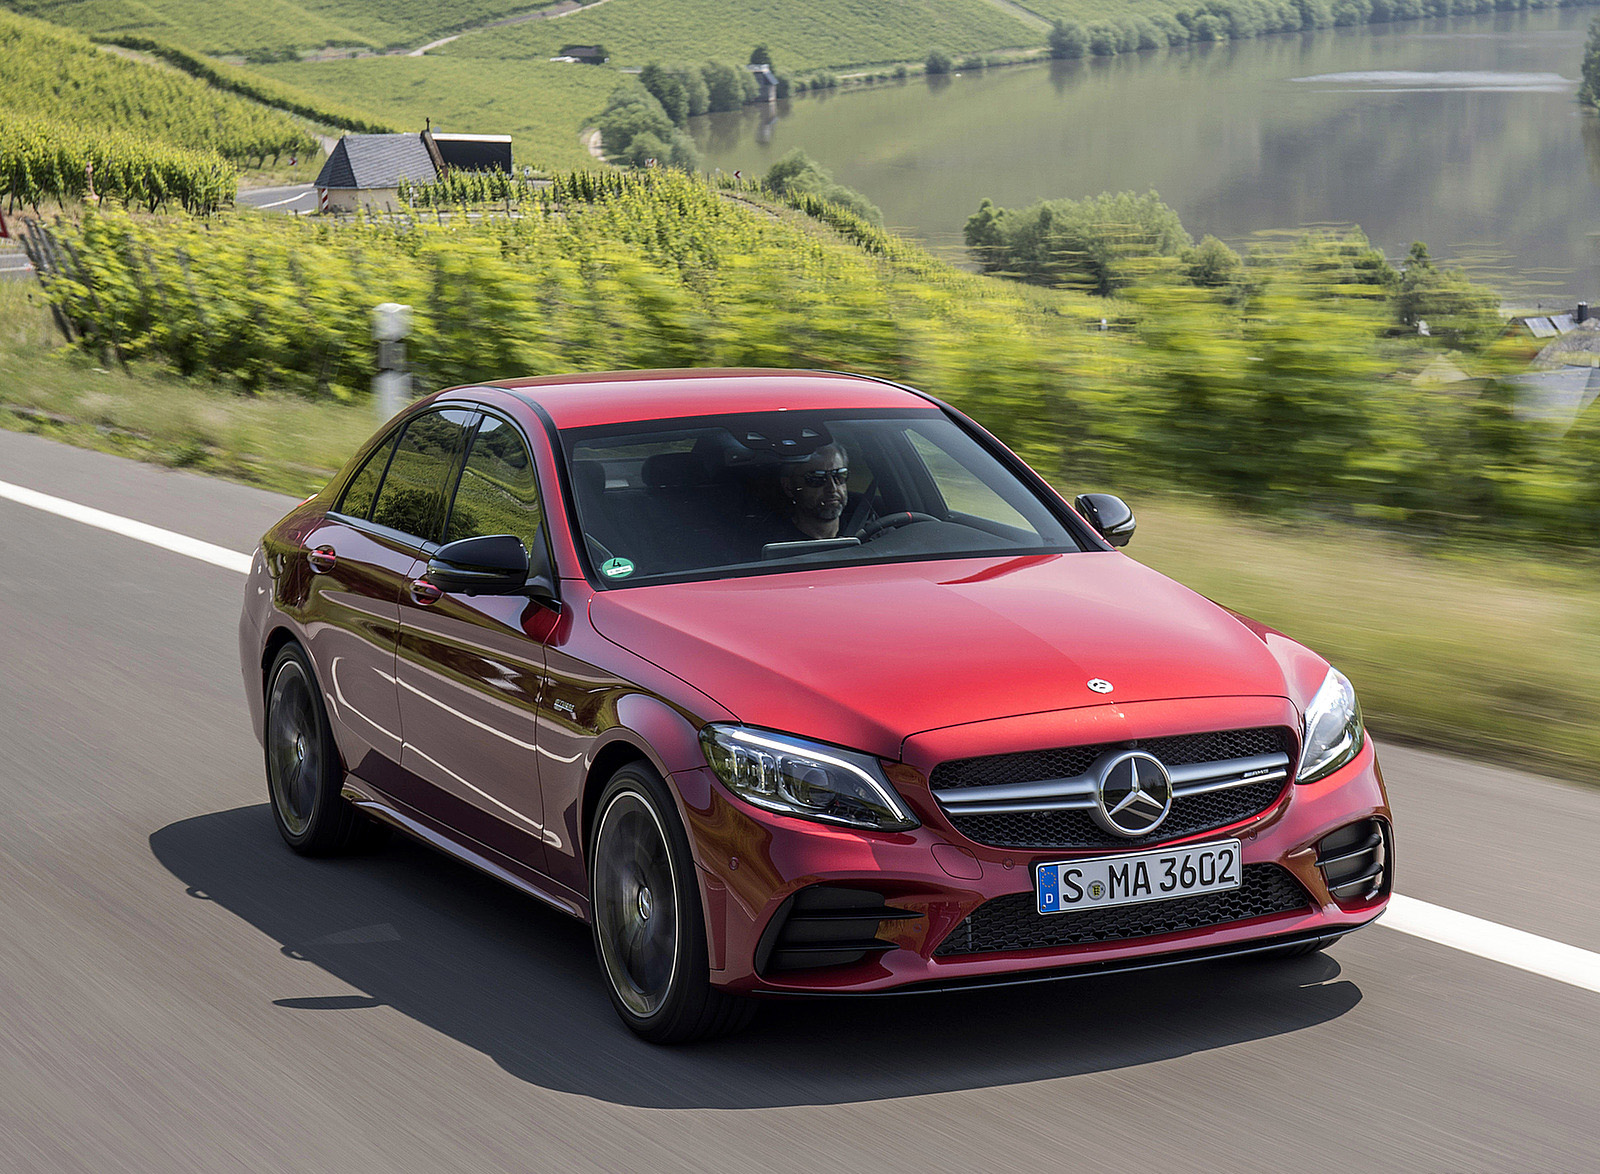 2019 Mercedes-AMG C43 4MATIC Sedan (Color: Hyacinth Red) Front Three-Quarter Wallpapers (4)